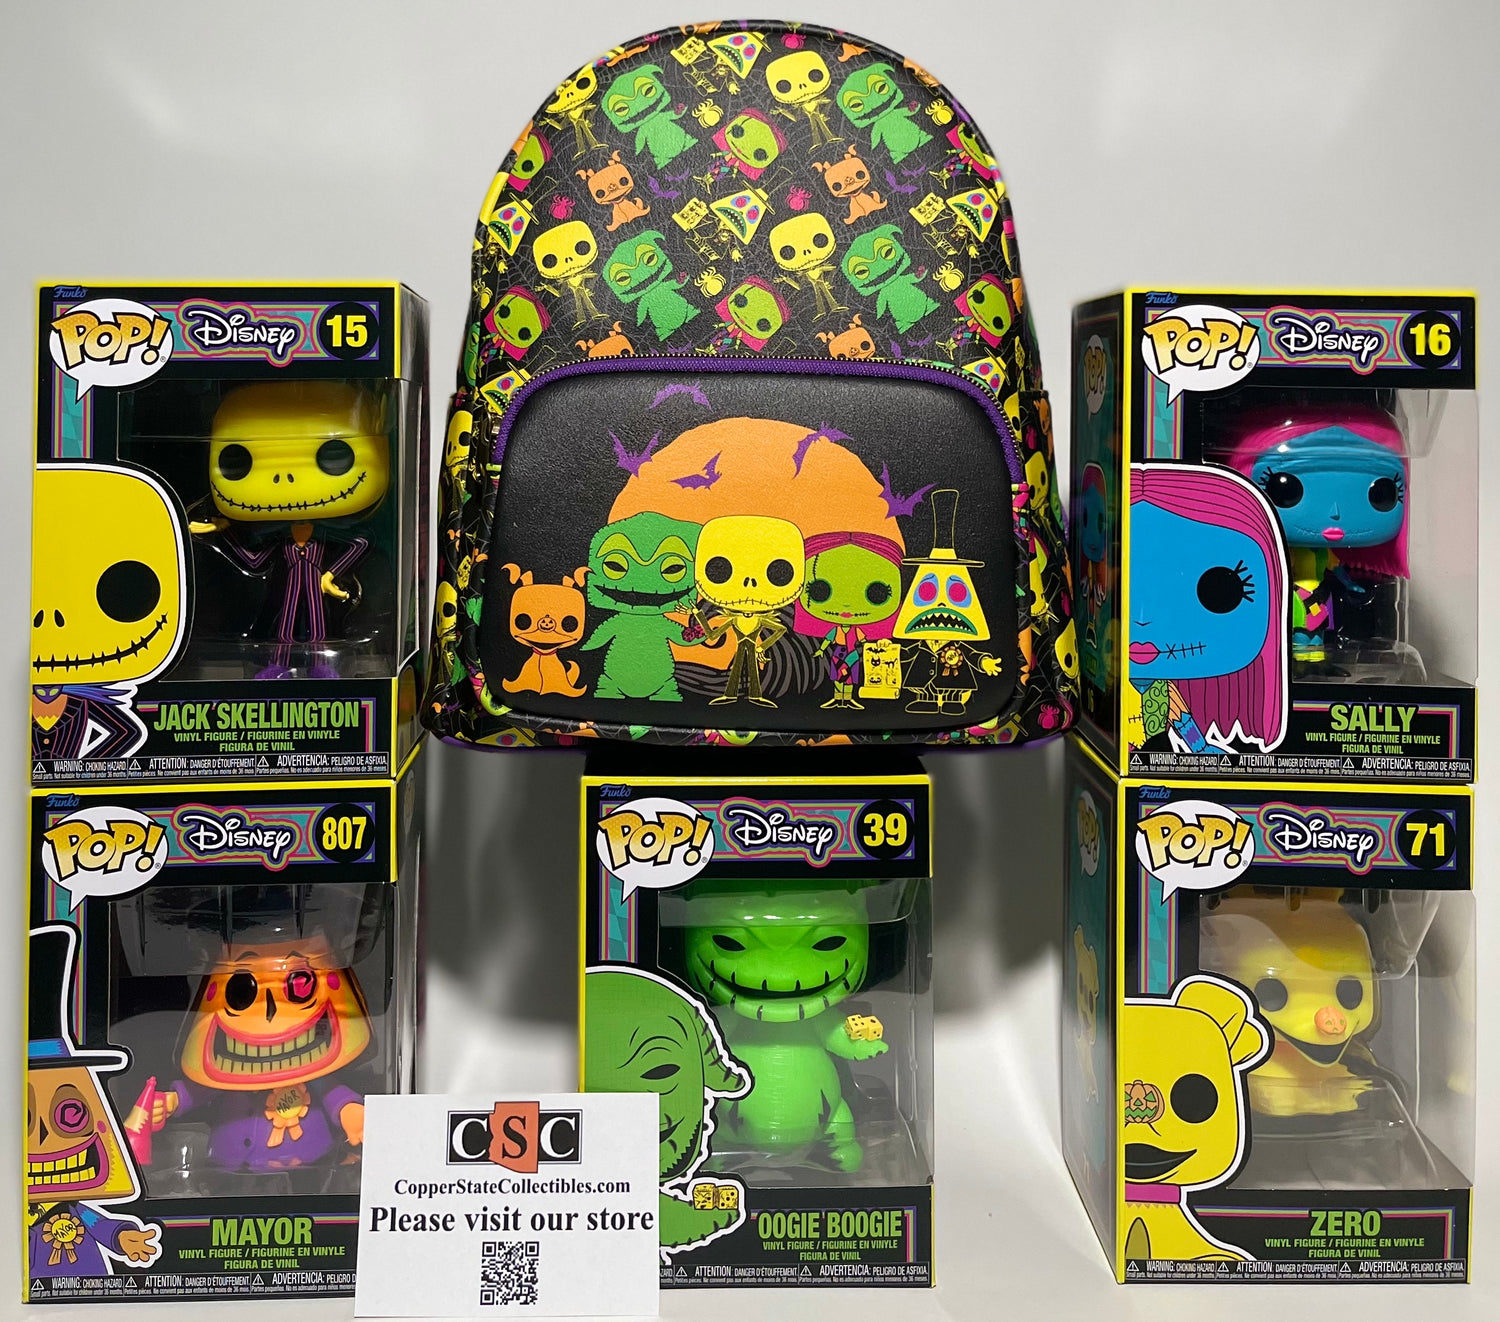 Nightmare Before Christmas Blacklight Pops and Backpack Gift Set 5 POPs and 1 PACK